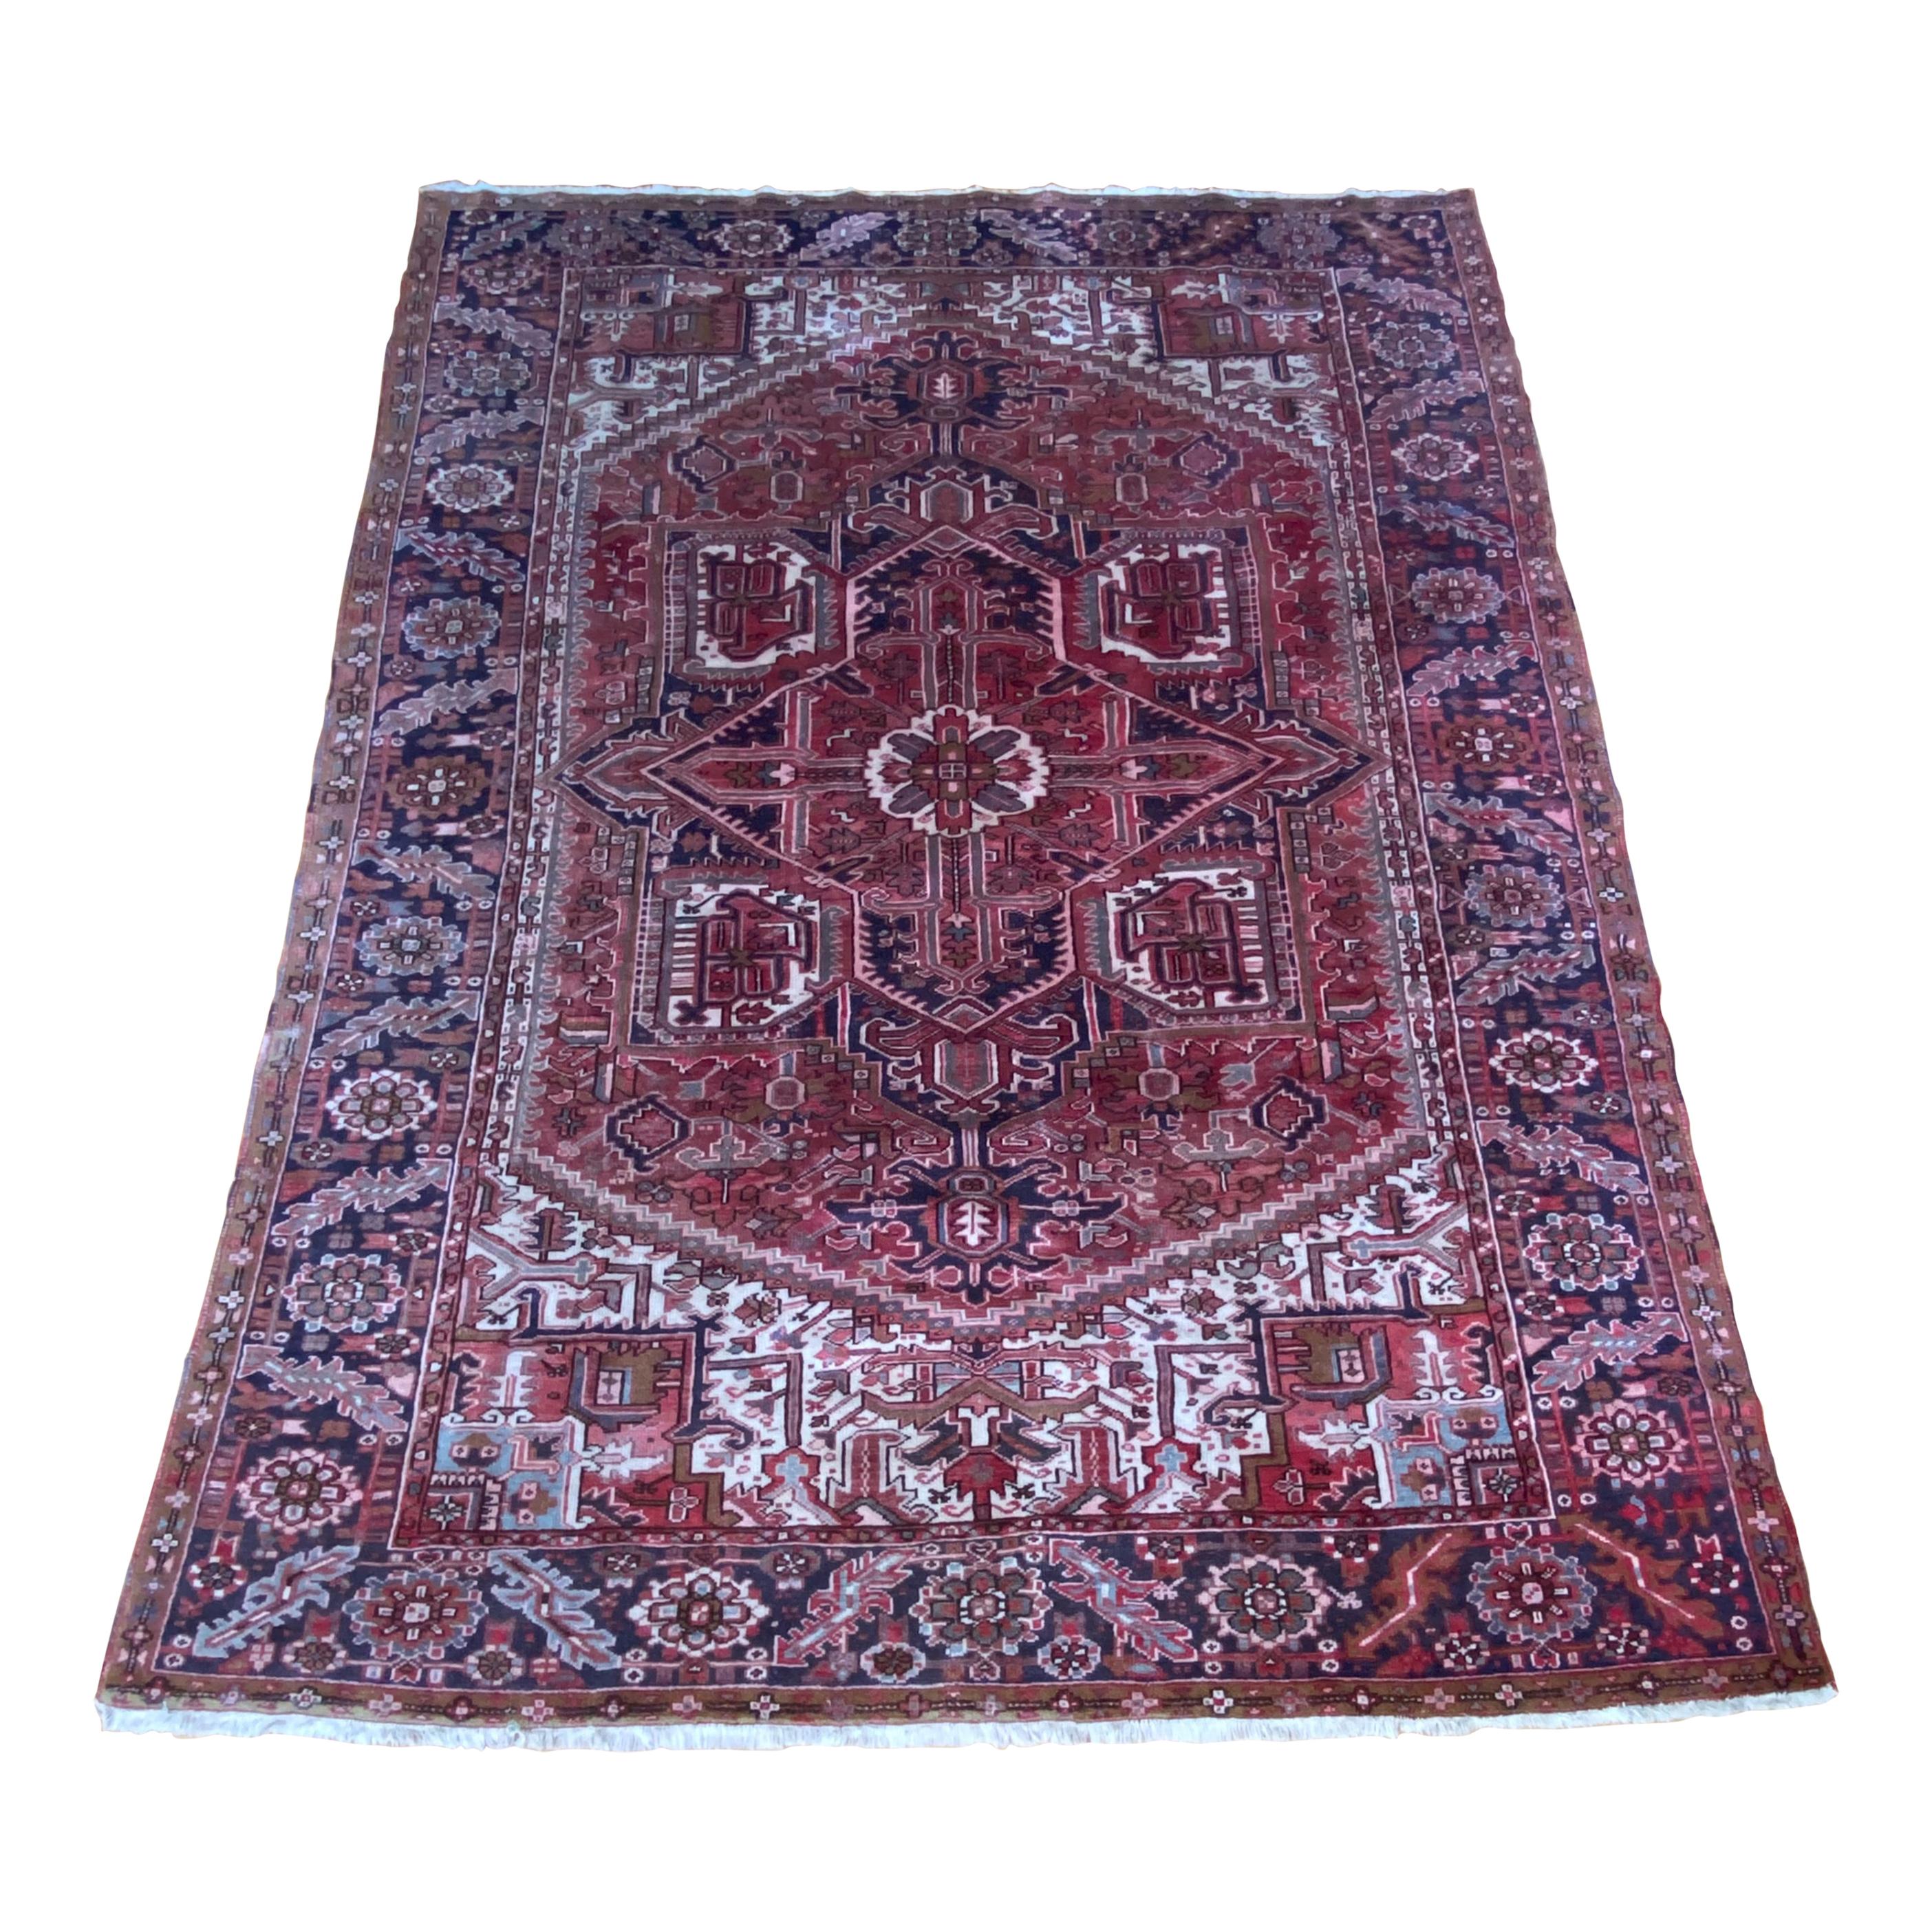 Late 19th to Early 20th Century Persian Rug